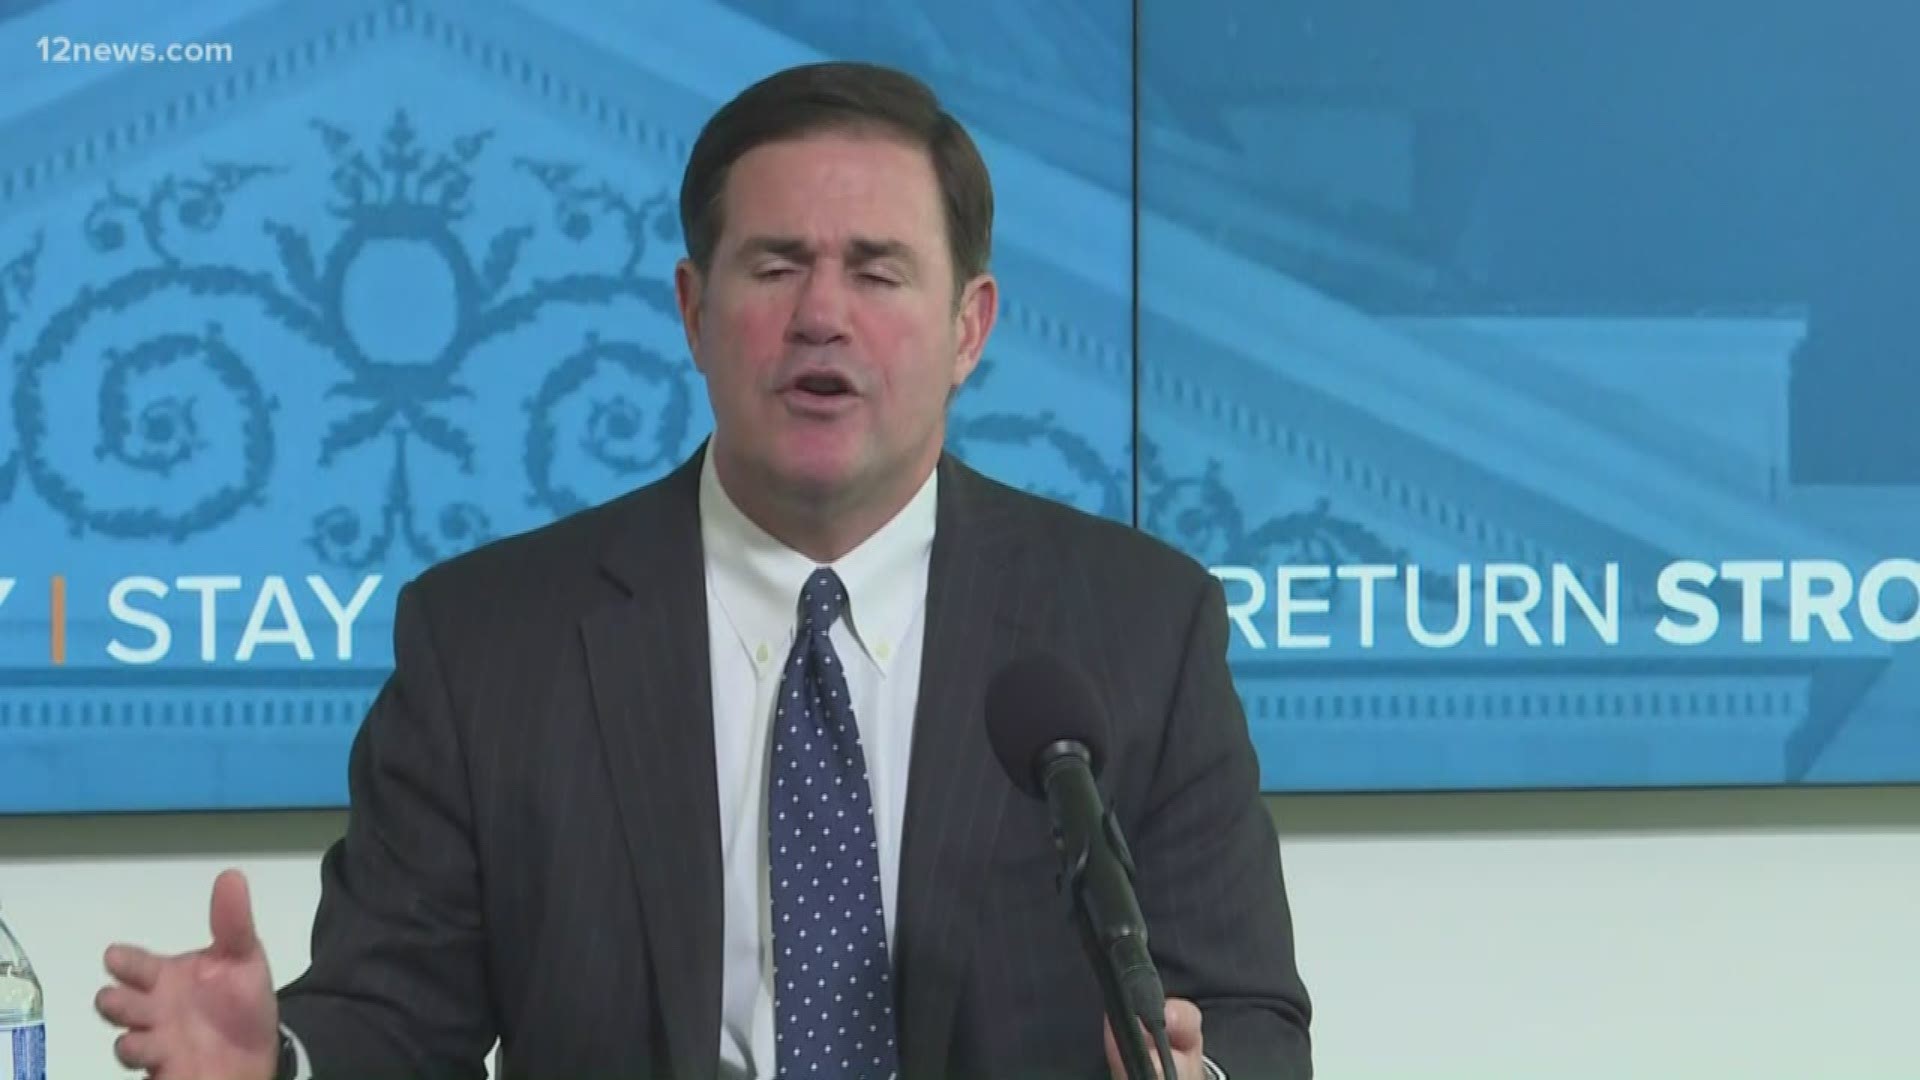 Gov. Ducey warned that people who disregard the stay-at-home extension could face a fine and jail time. The order is extended until May 15.